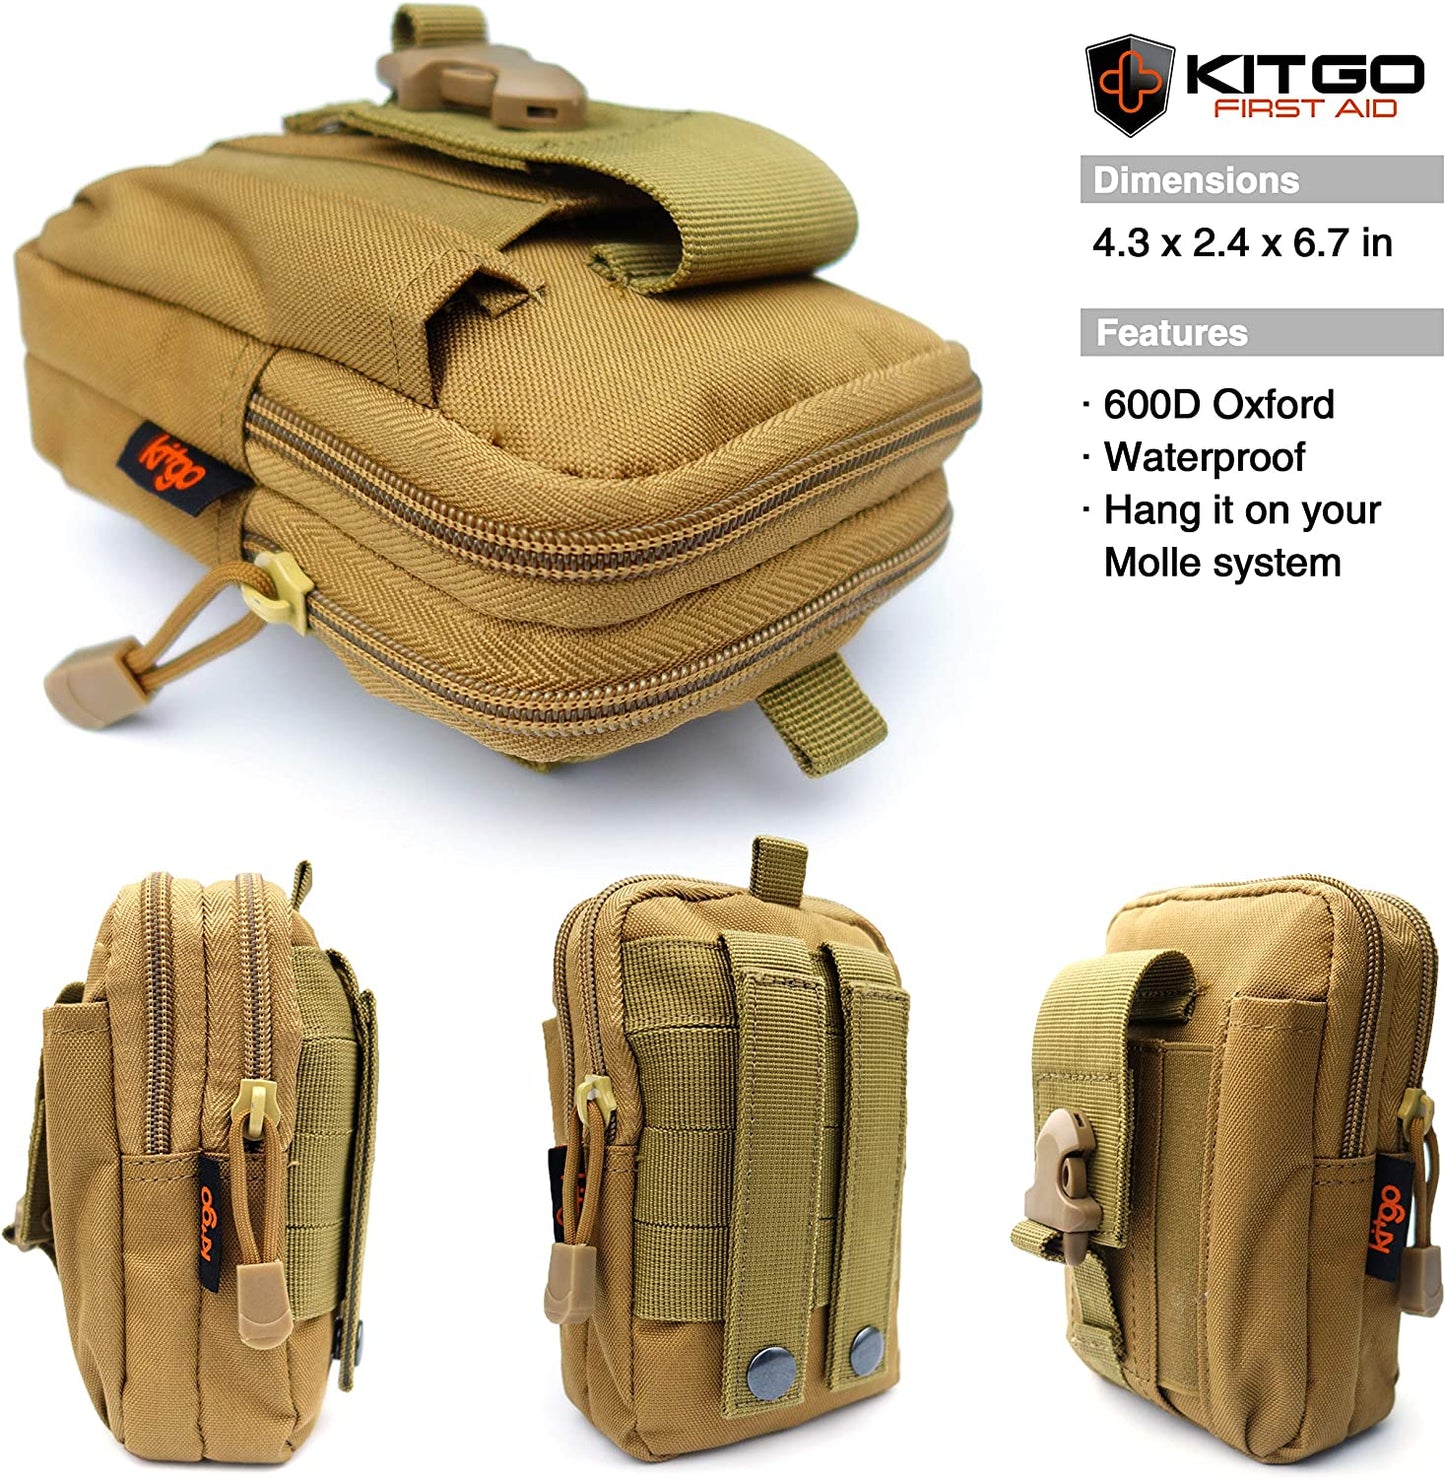 Outdoor Survival First Aid Kit 101 Piece Professional Emergency Survival Gear Tool for Hunting Hiking Camping Outdoor Adventure Fishing Travel Home Office Military Tropical Storms (Khaki)